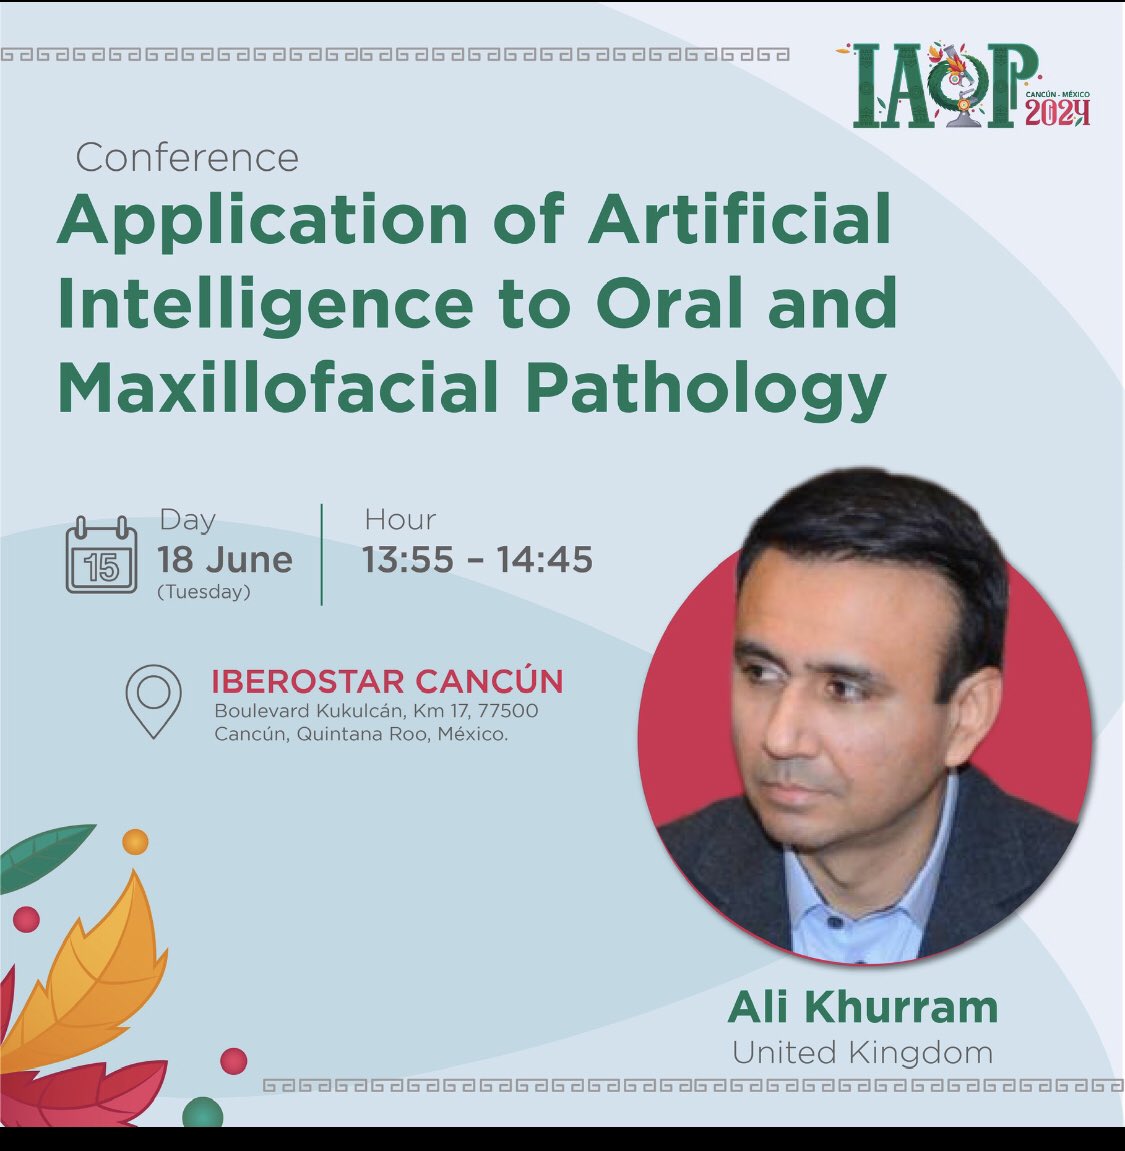 Do not miss!
#IAOP2024 welcomes Dr. Ali Khurram, a distinguished professor from the University of Sheffield, UK.

He will deliver a presentation titled 'Application of Artificial Intelligence to Oral and Maxillofacial Pathology' 

#oralpath #ENTPath #digitalPath #AI